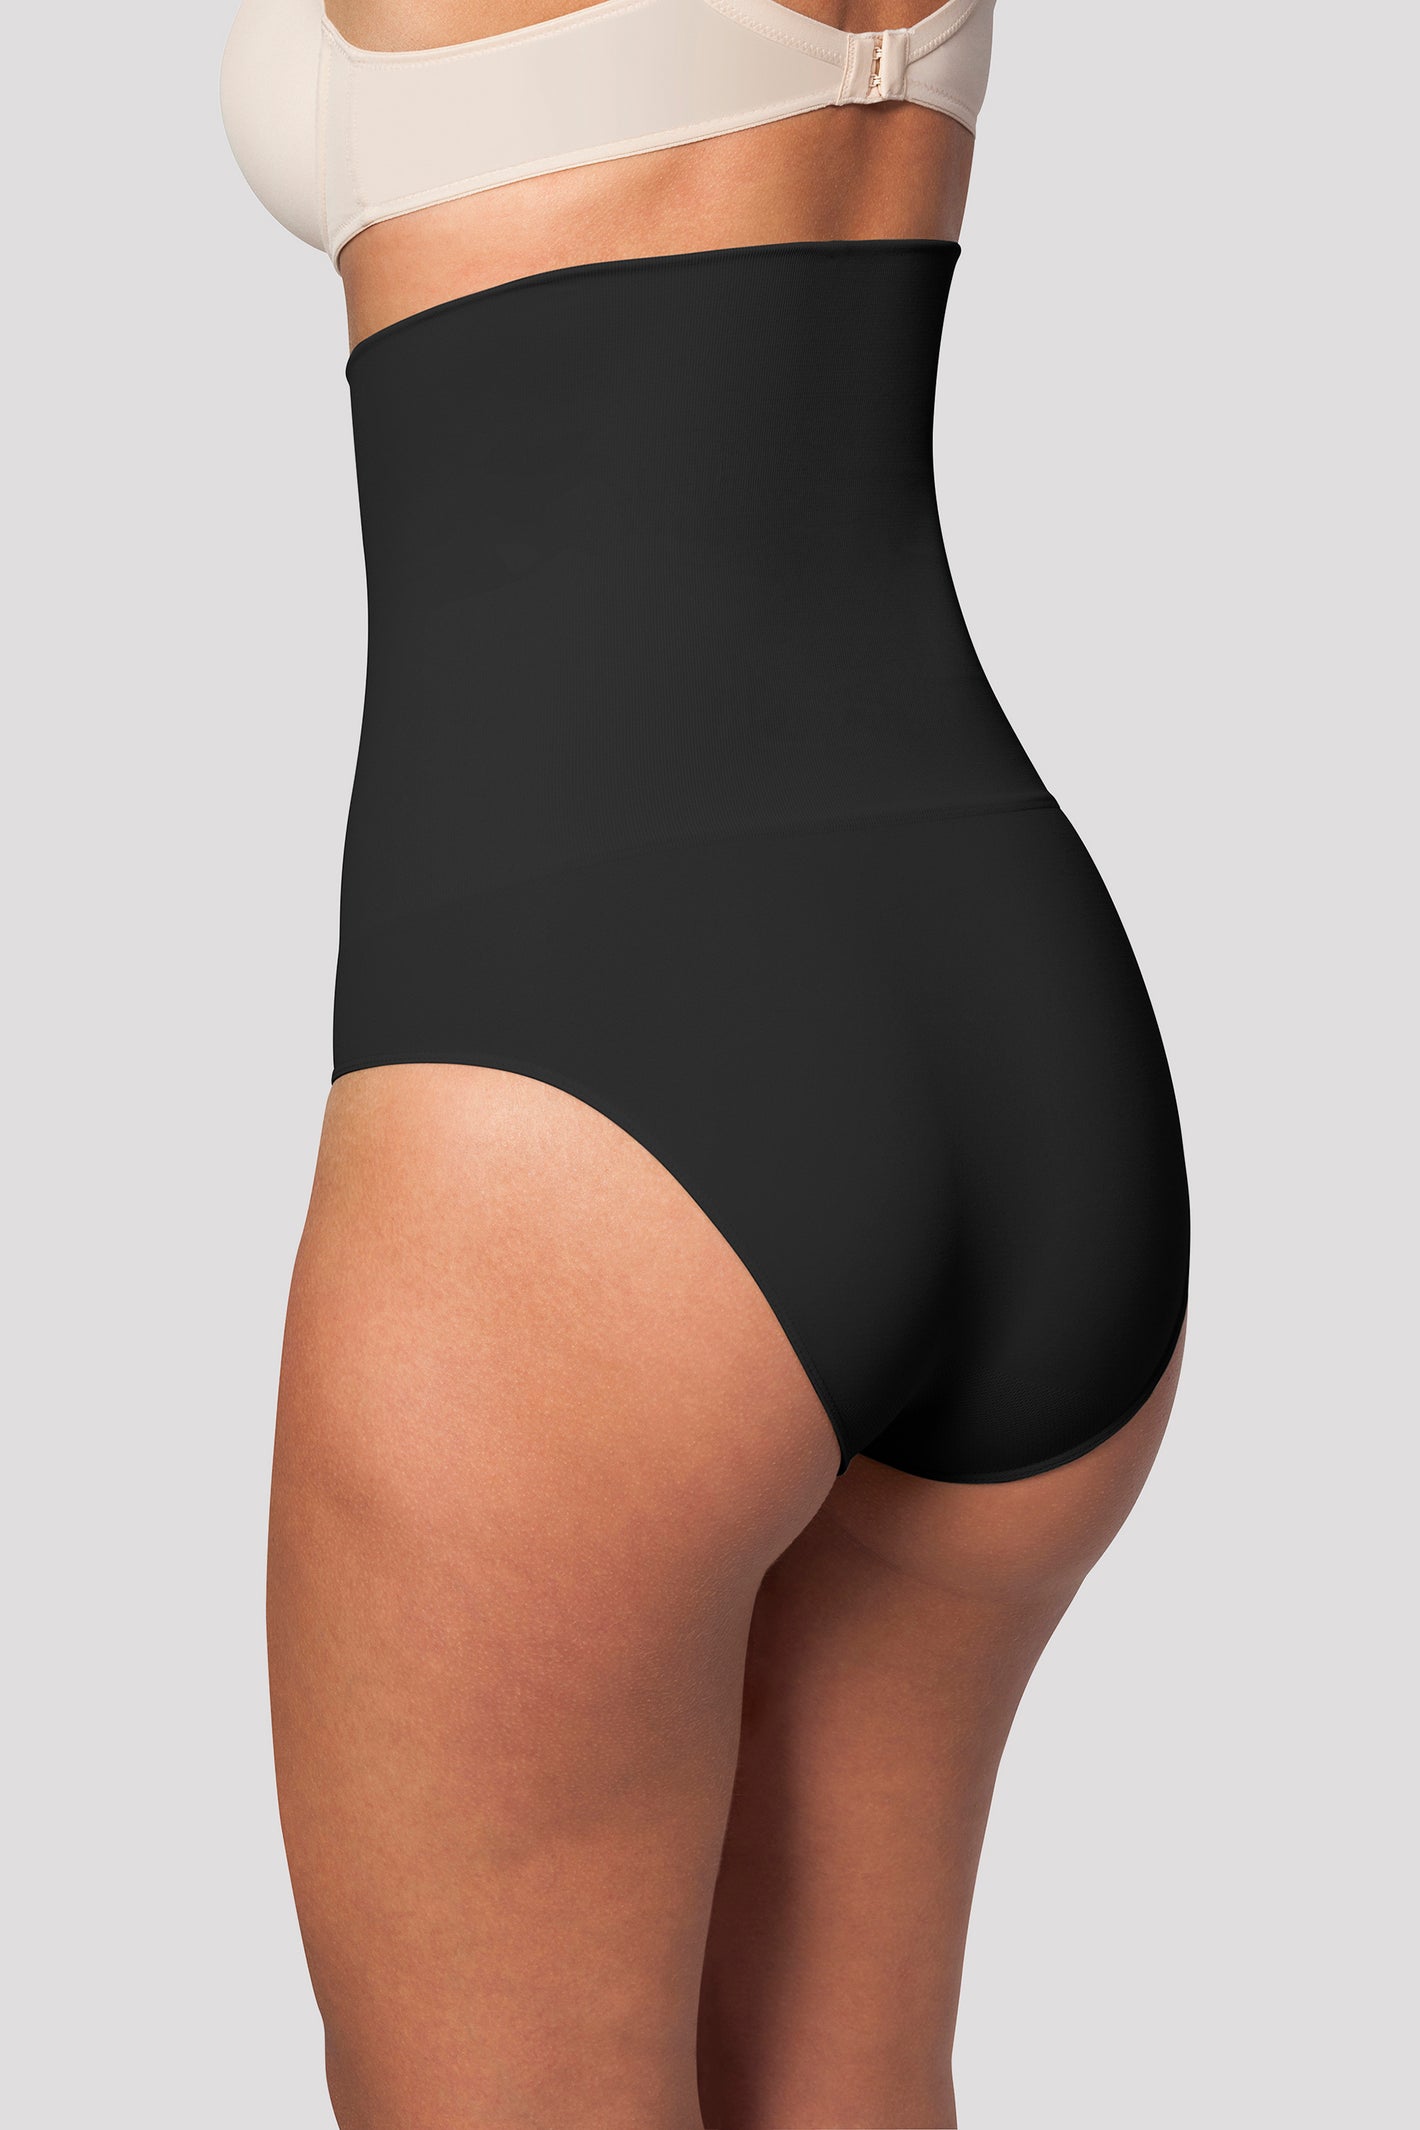 back view of shapewear brief - Black